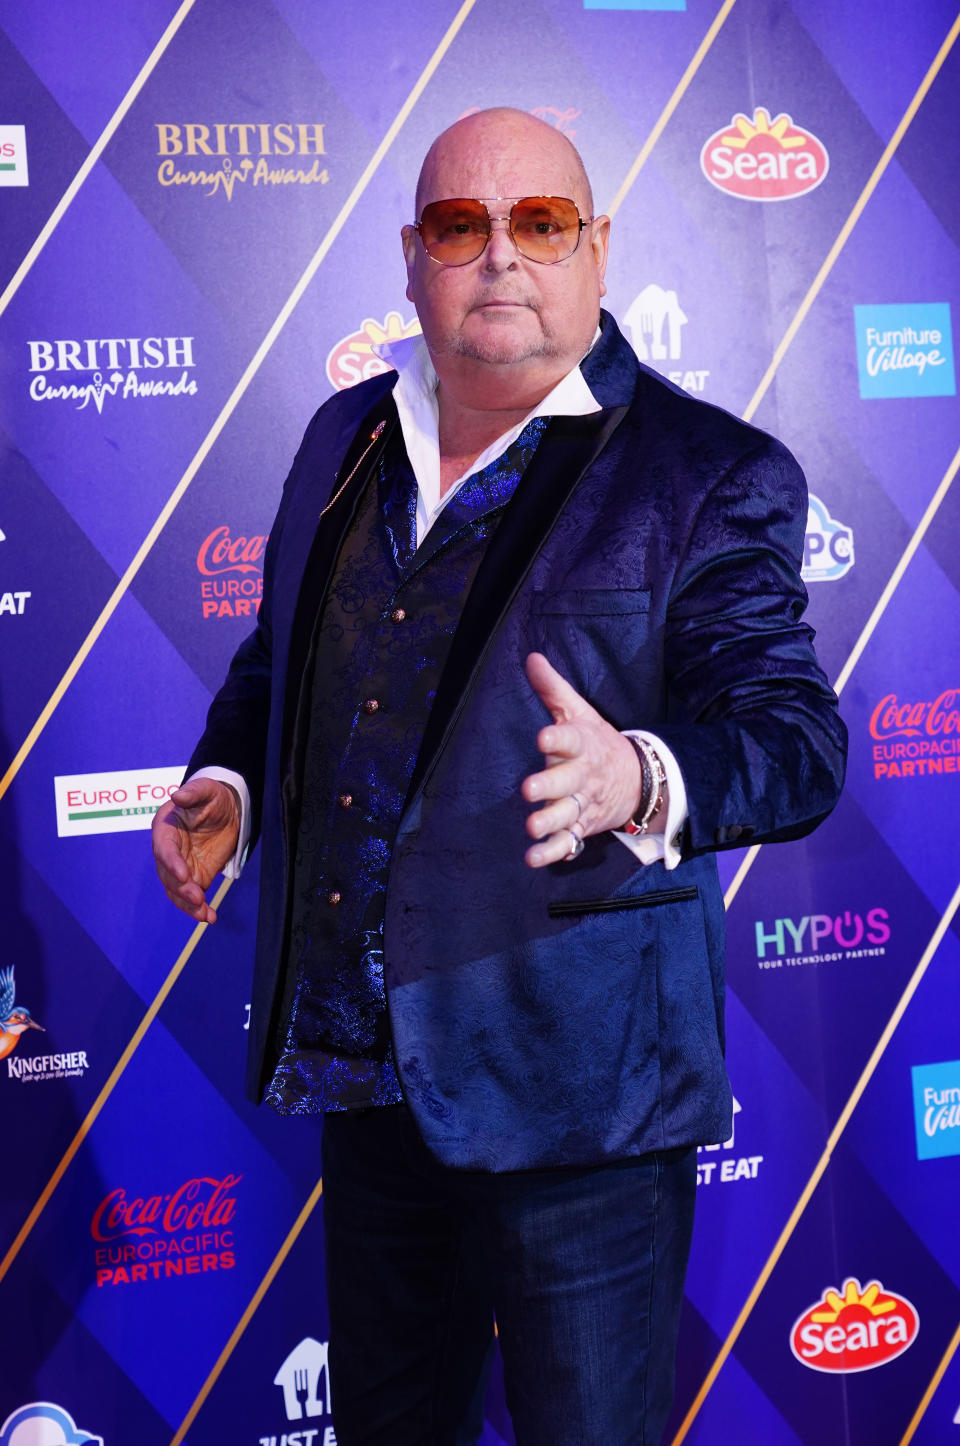 James Whale arrives at the British Curry Awards 2022 at Evolution London. Picture date: Monday November 28, 2022.